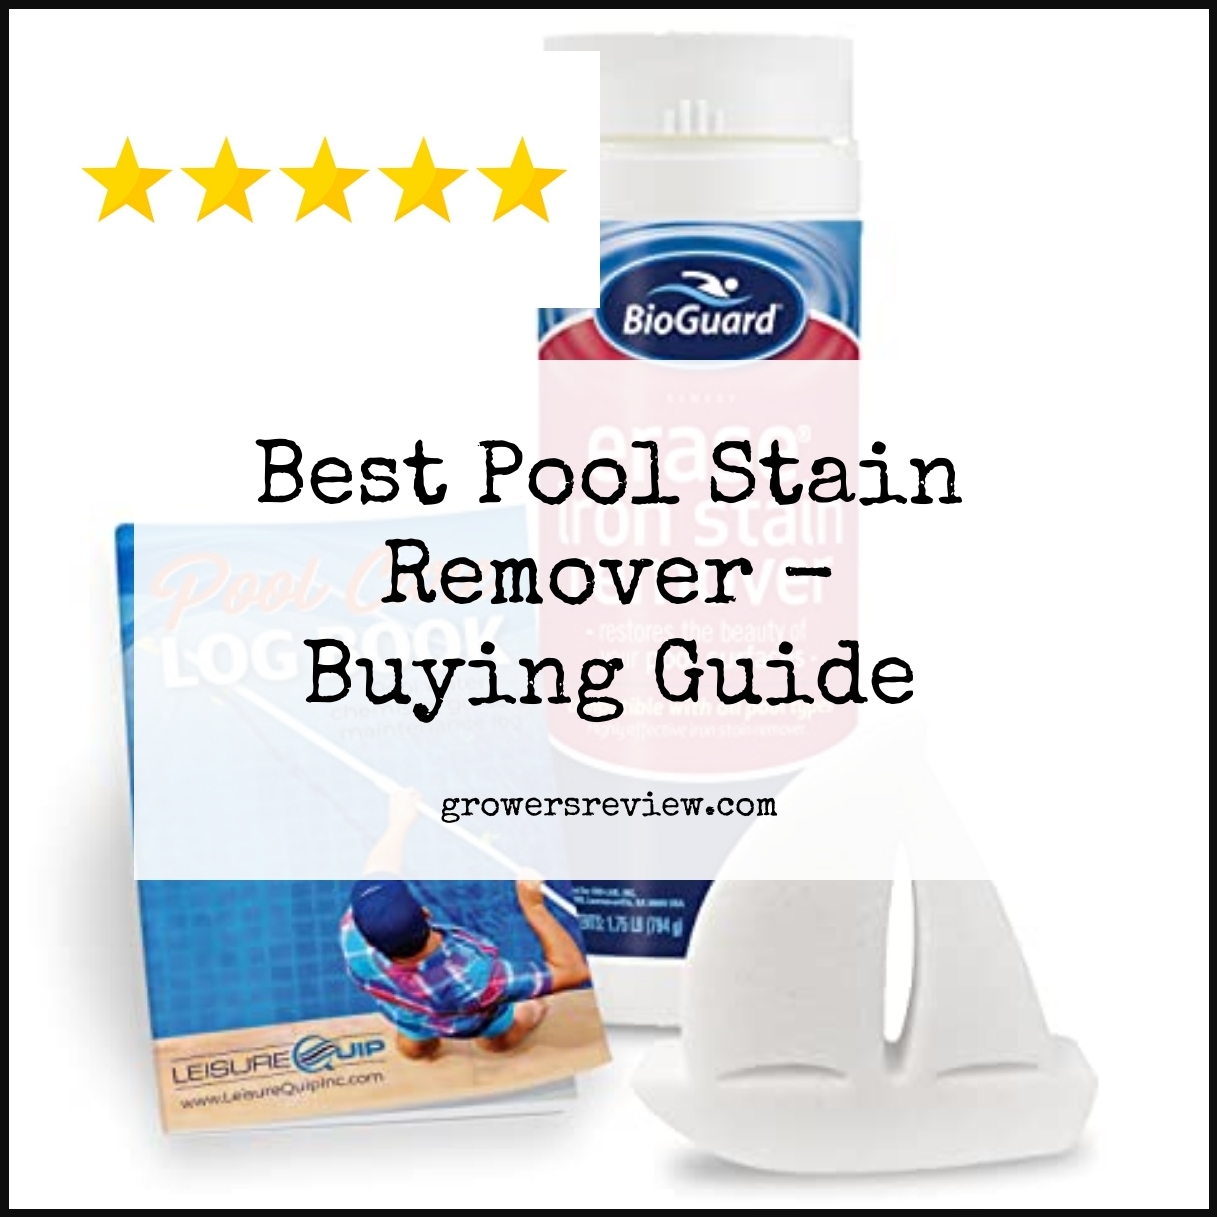 Best Pool Stain Remover - Buying Guide